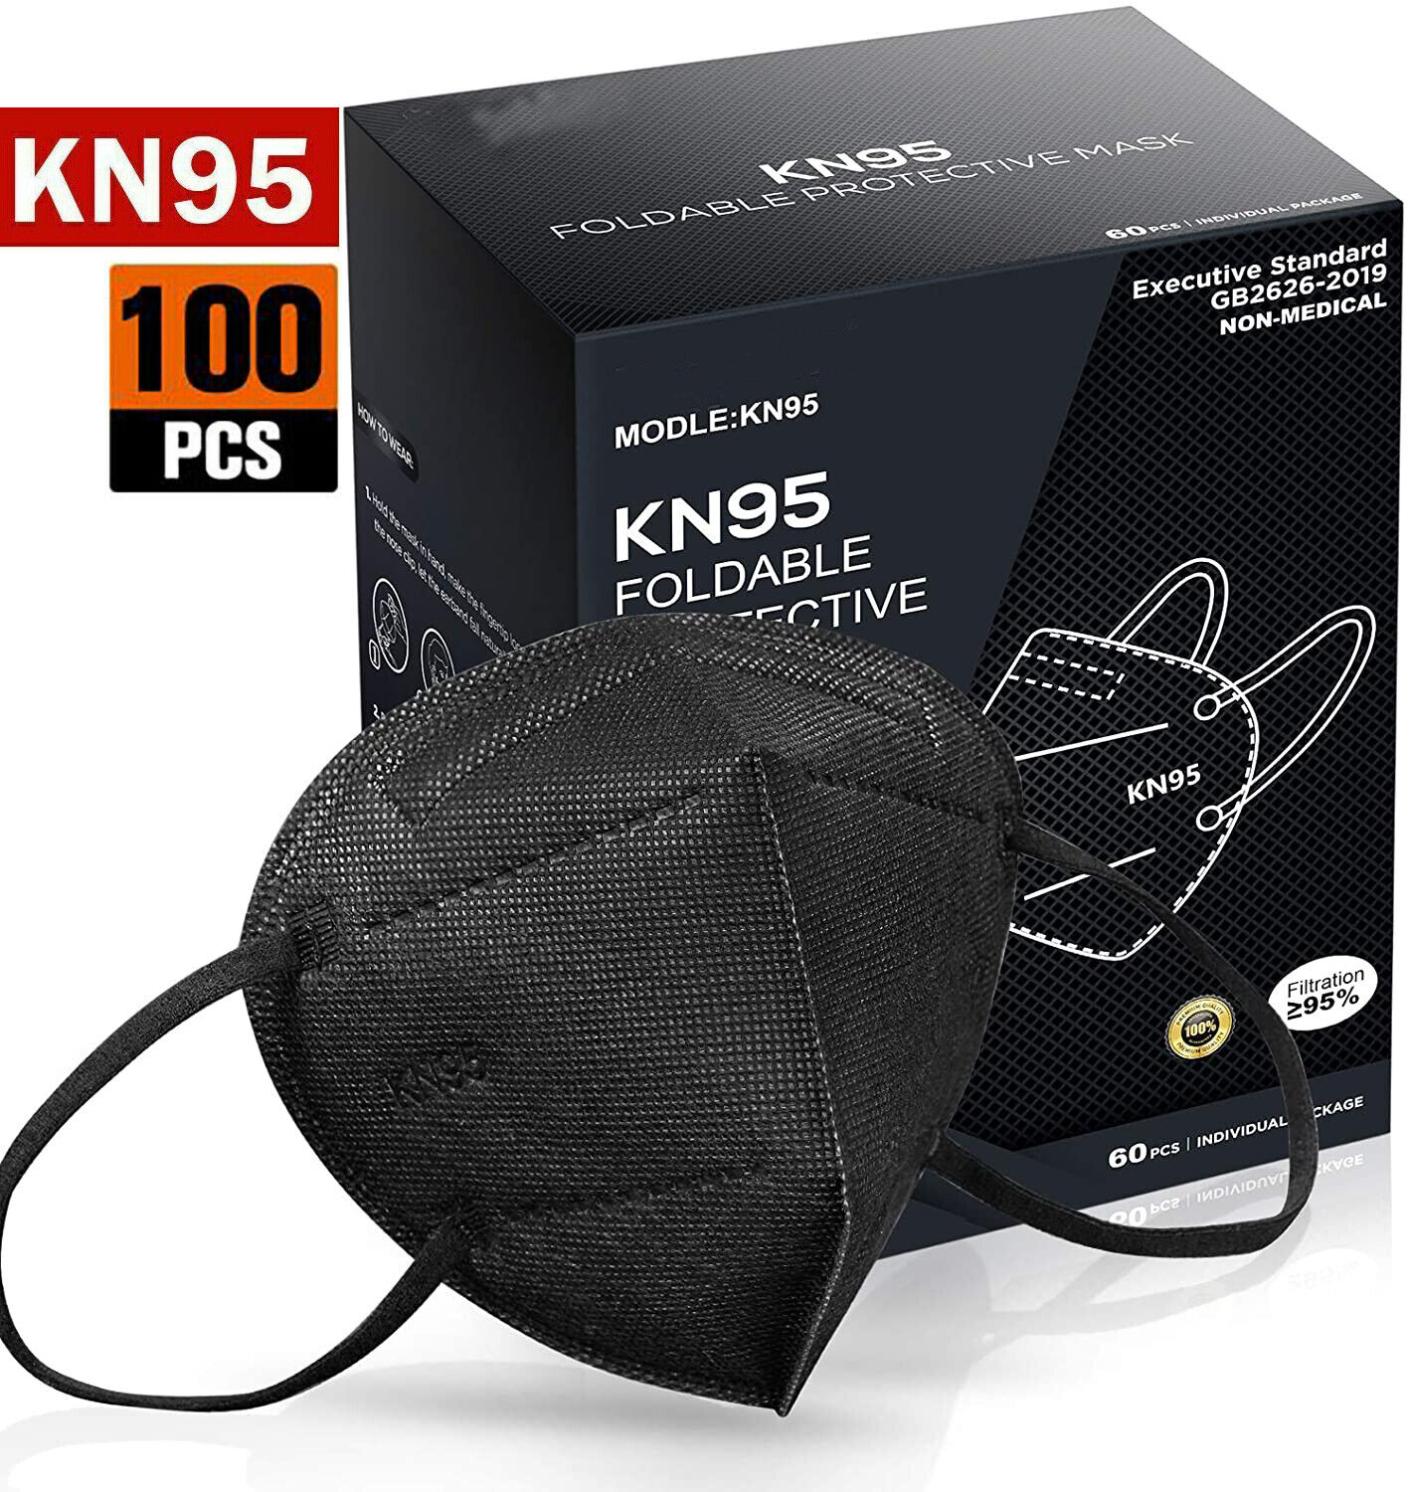 How Do I Know If An N95 Mask Is Counterfeit?